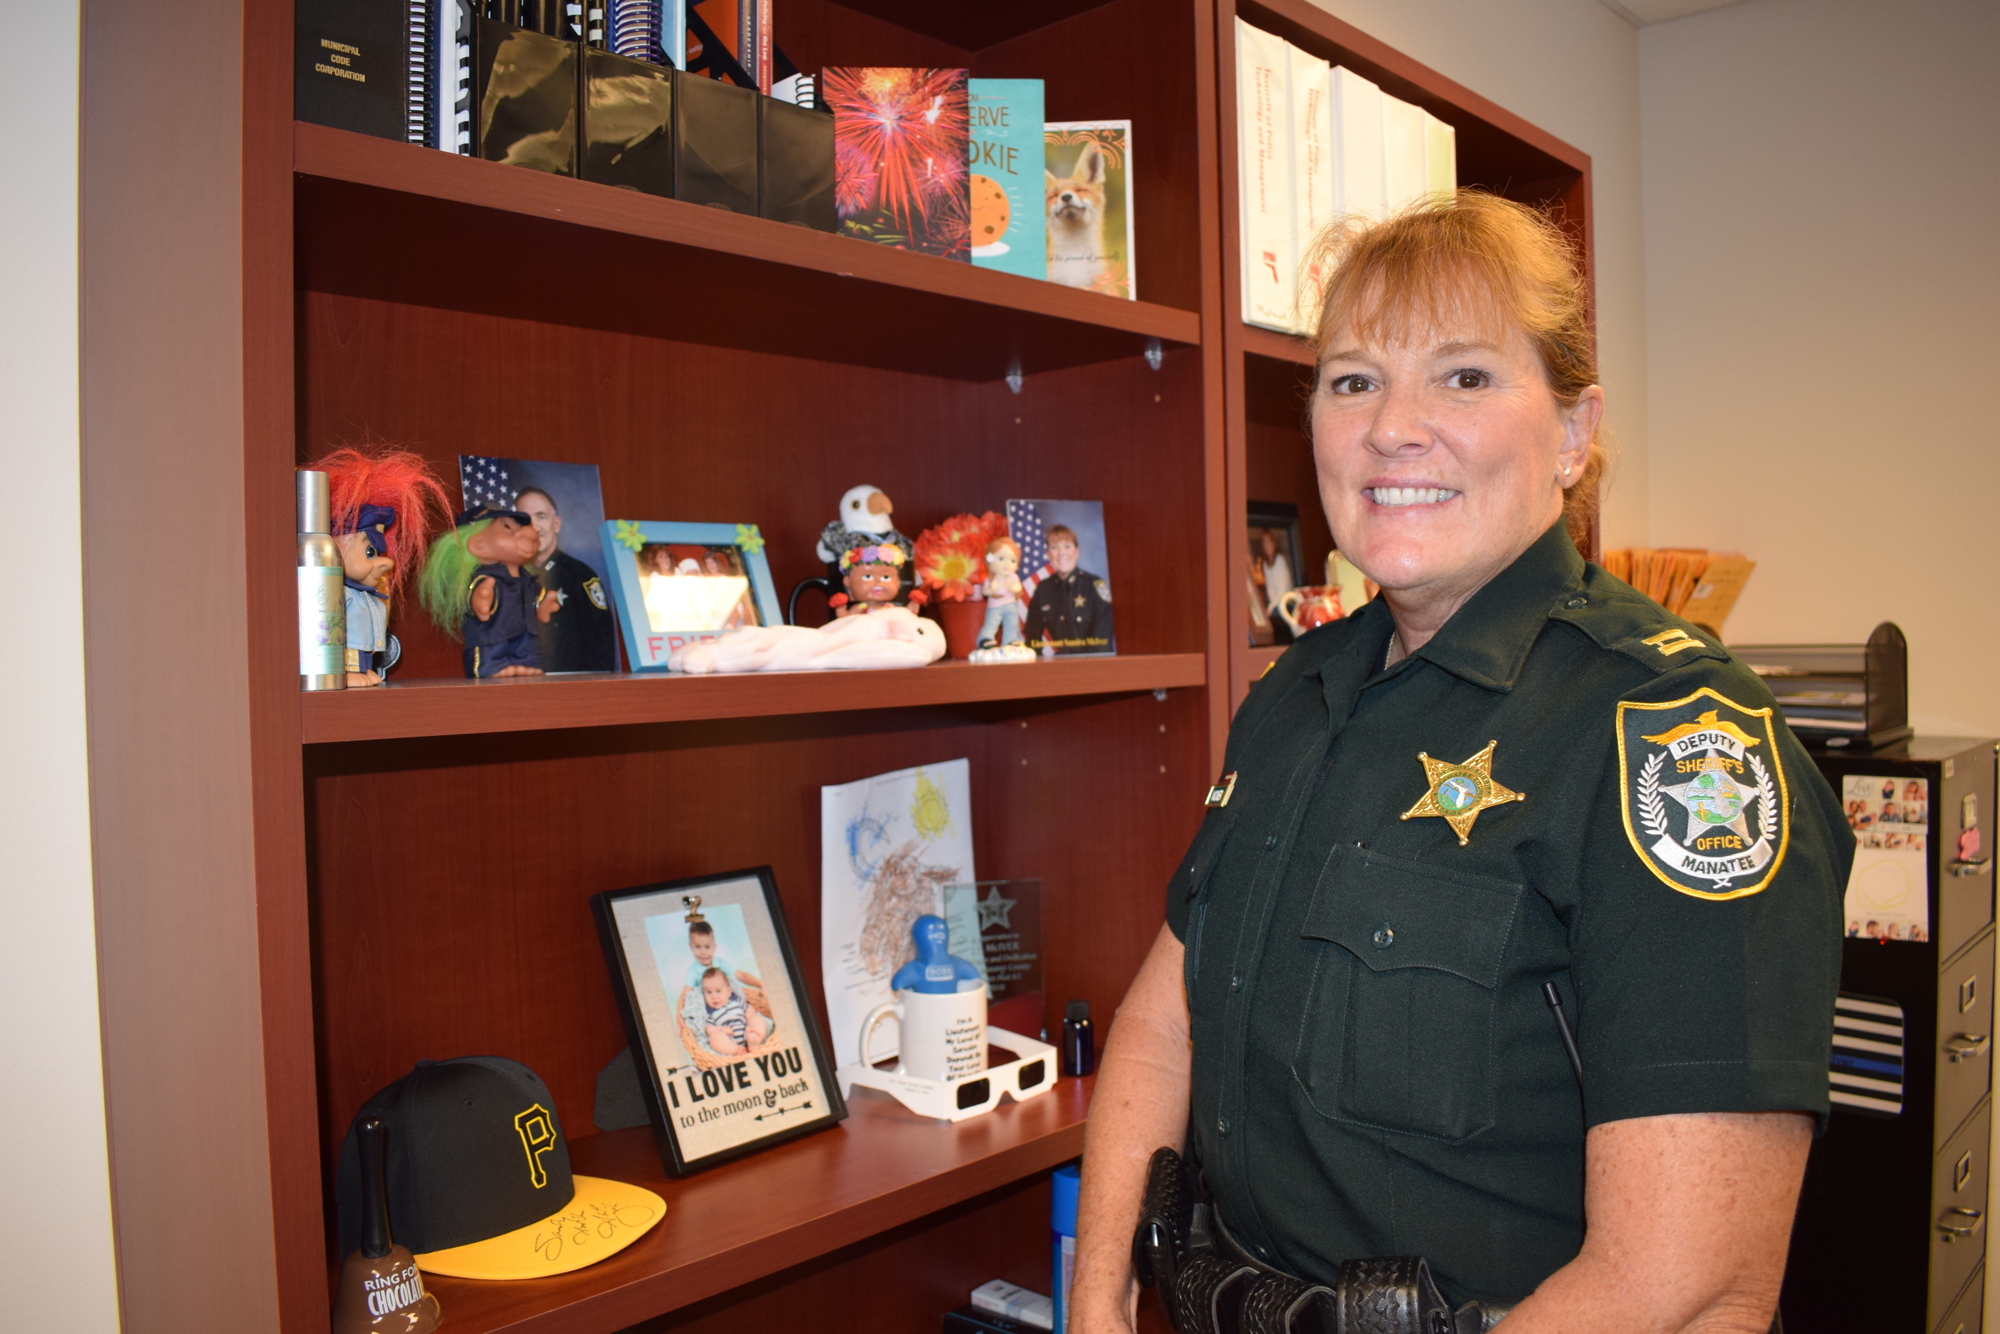 Capt. Sandy McIver joined the Sheriff's Office in 1986.